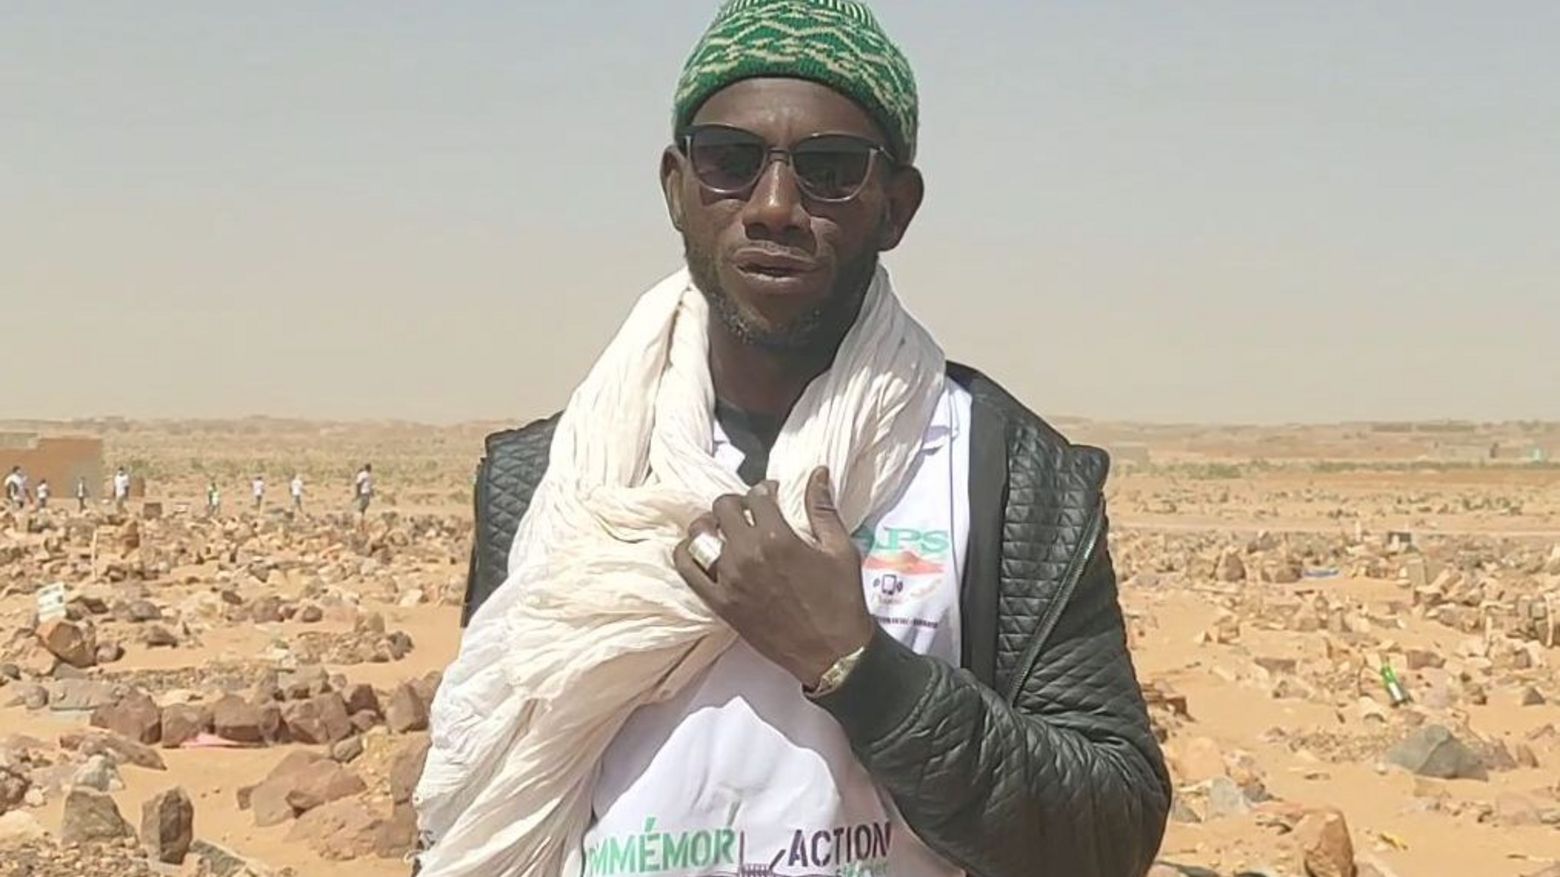 Moctar Dan Yaye at the commemorial action at the cementury of Agadez on February 6th 2022.